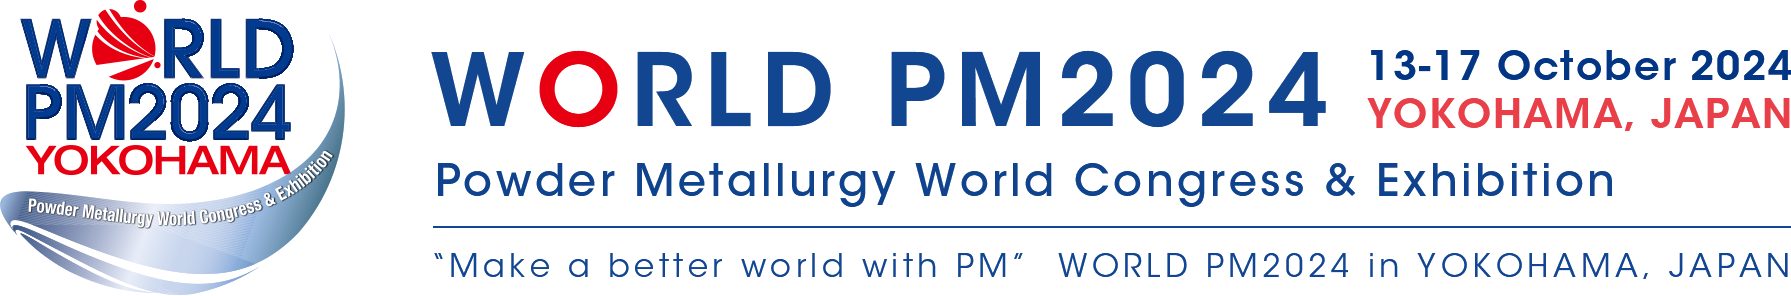 Image for World PM 2024